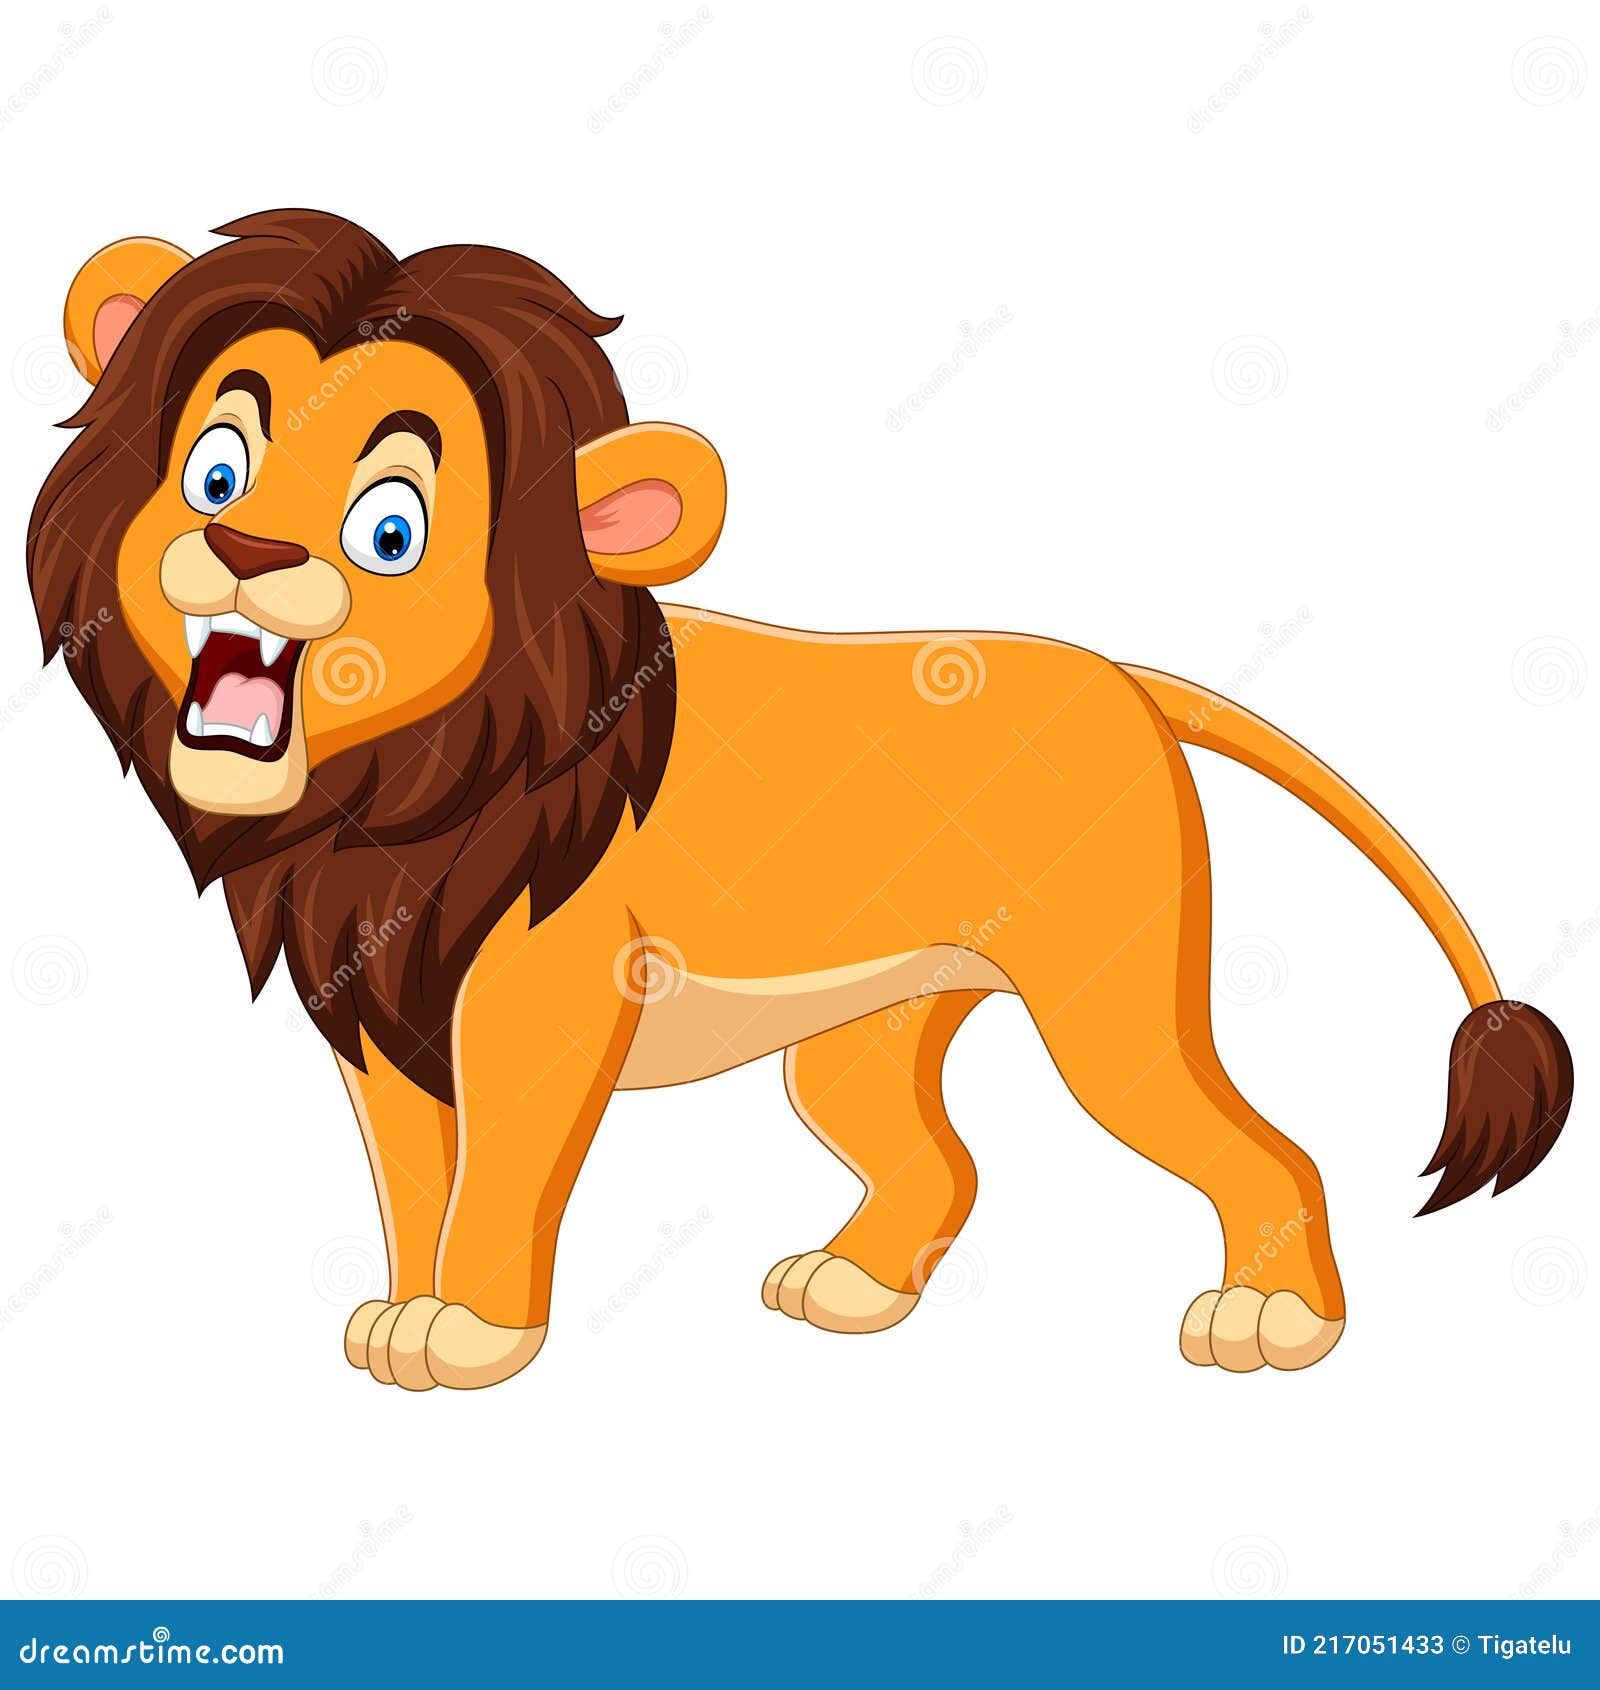 Cartoon Lion Roaring Isolated on White Background Stock Vector ...